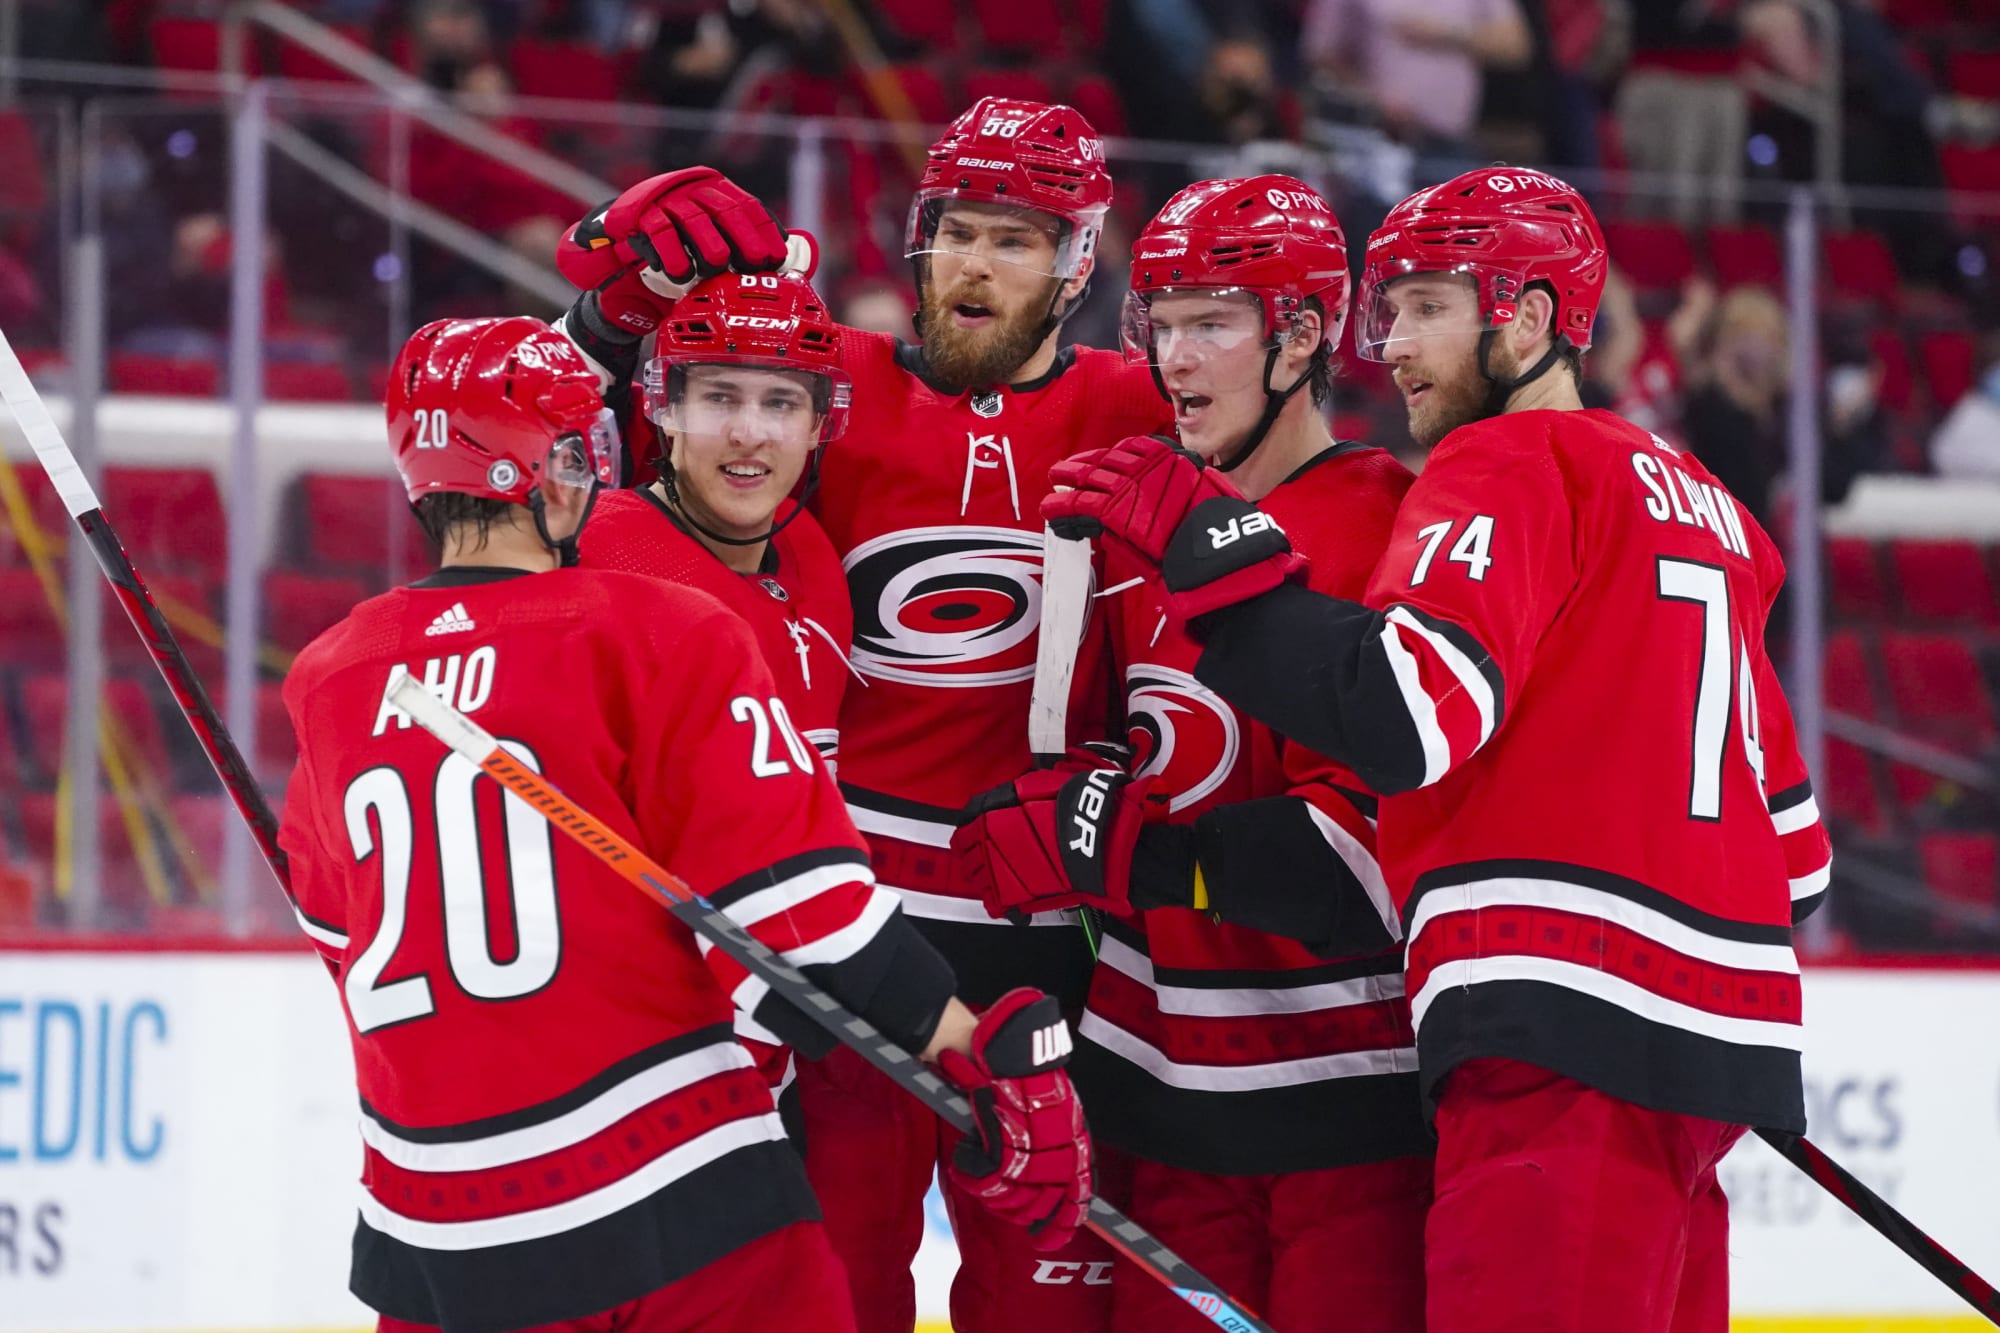 Carolina Hurricanes Clinch 2nd or Better in Big Win vs. Chicago